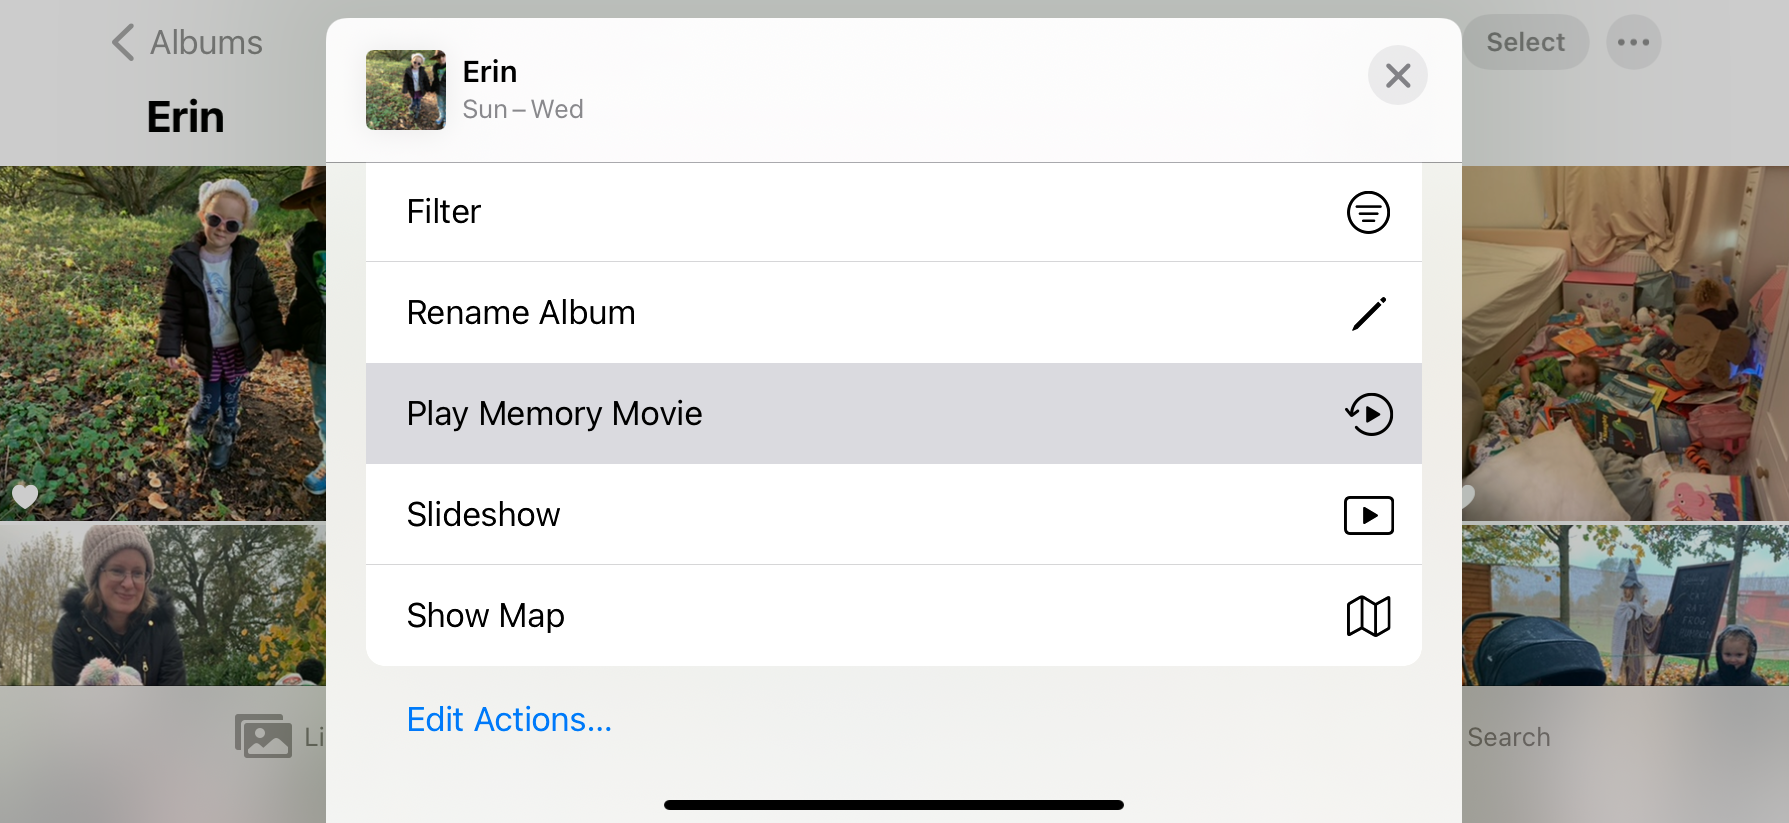 How to make a video slideshow on your iPhone using Photos